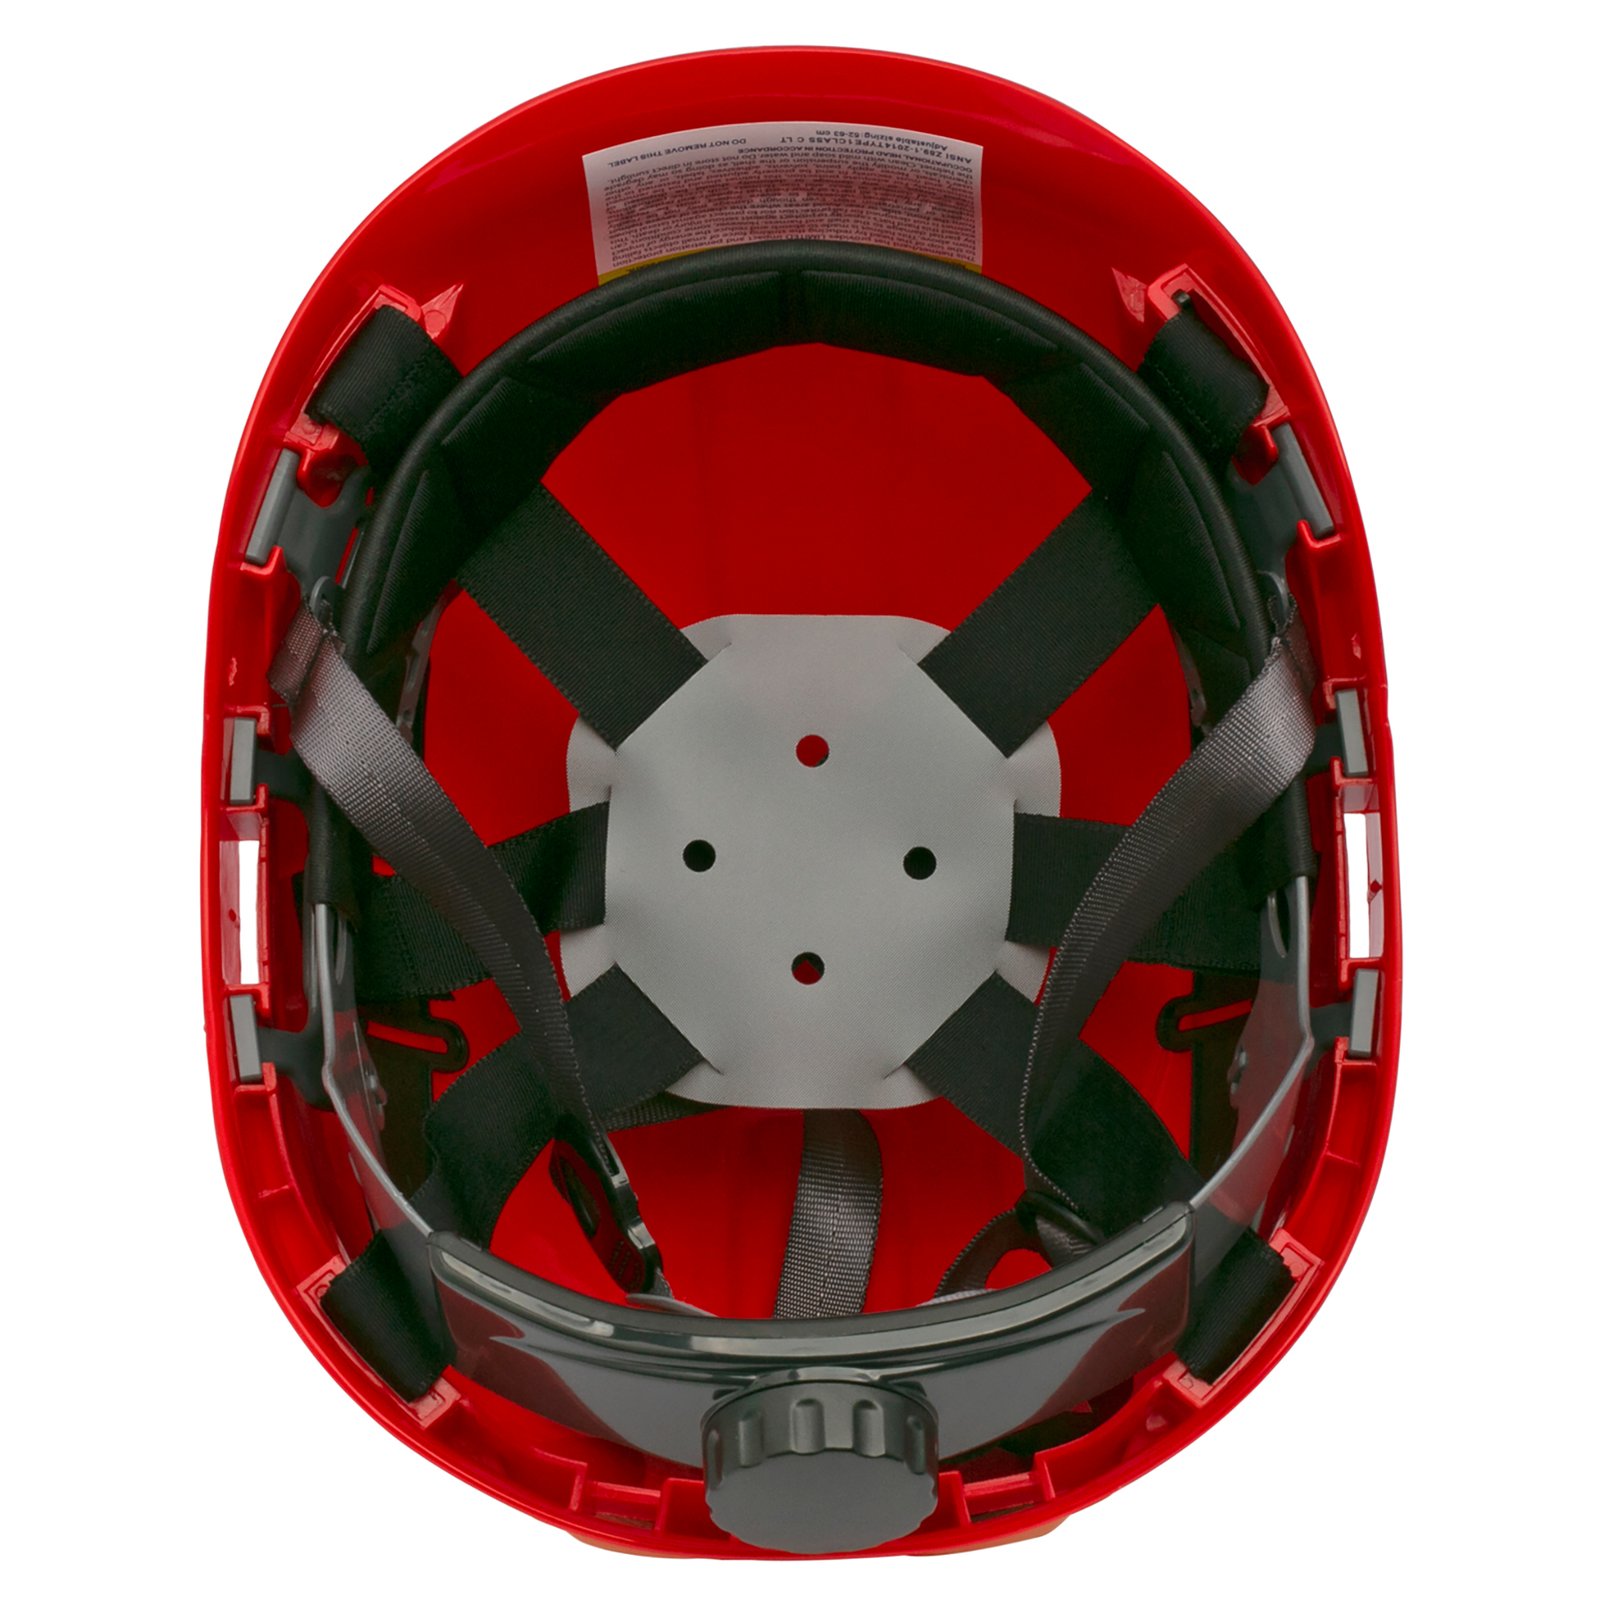 Bottom view of the Jorestech red ventilated hard hat with adjustable 6 point suspension installed 